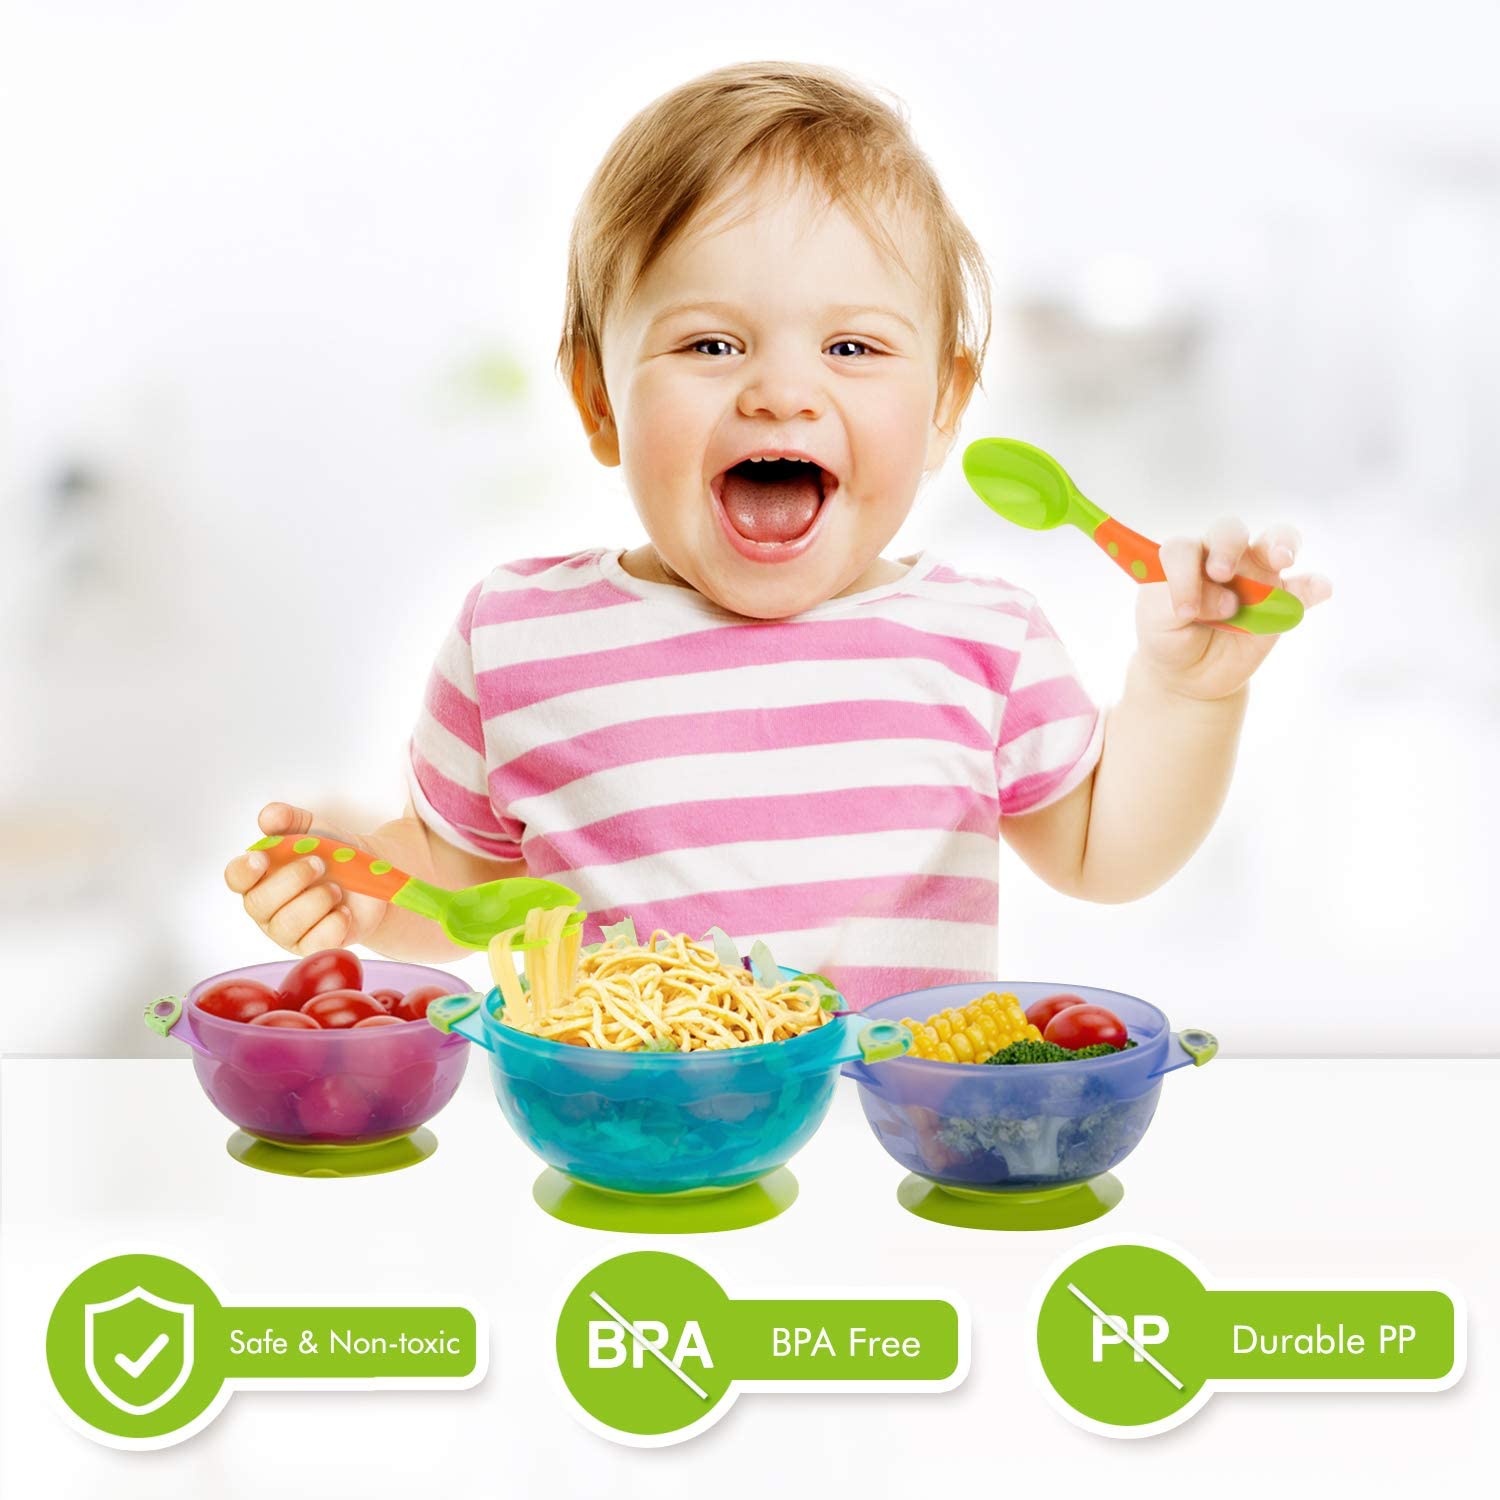 Zooawa Baby Suction Bowls + Fork Spoon Set, 3 Pack Nonslip Spill Proof BPA-Free Feeding Bowls with Lids.